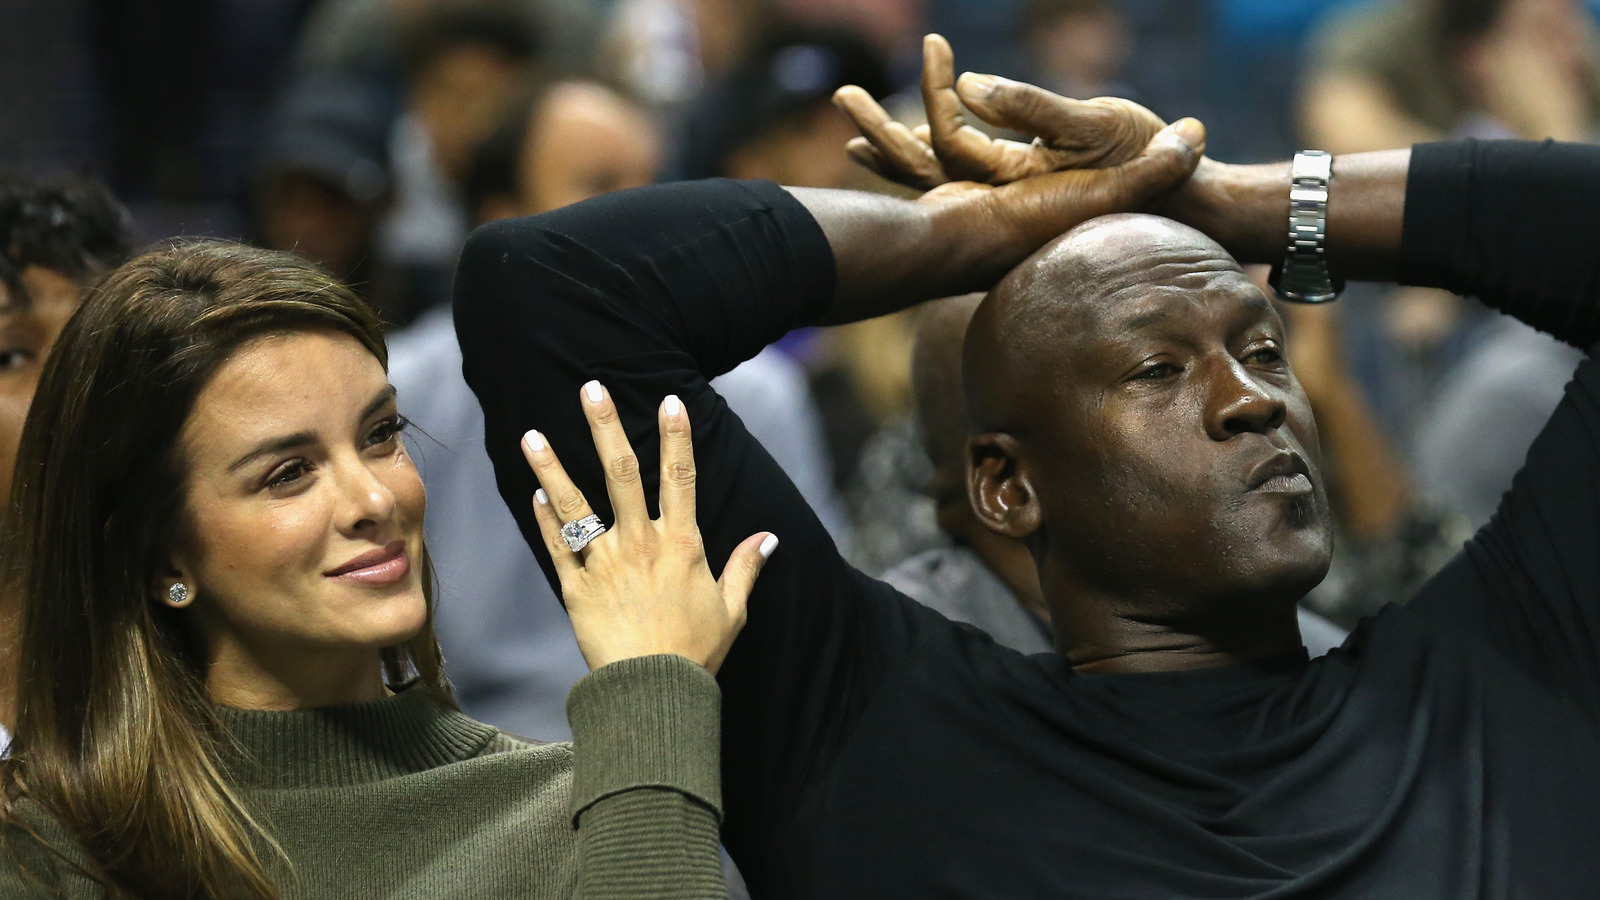 yvette prietos engagement ring from michael jordan cost a fortune